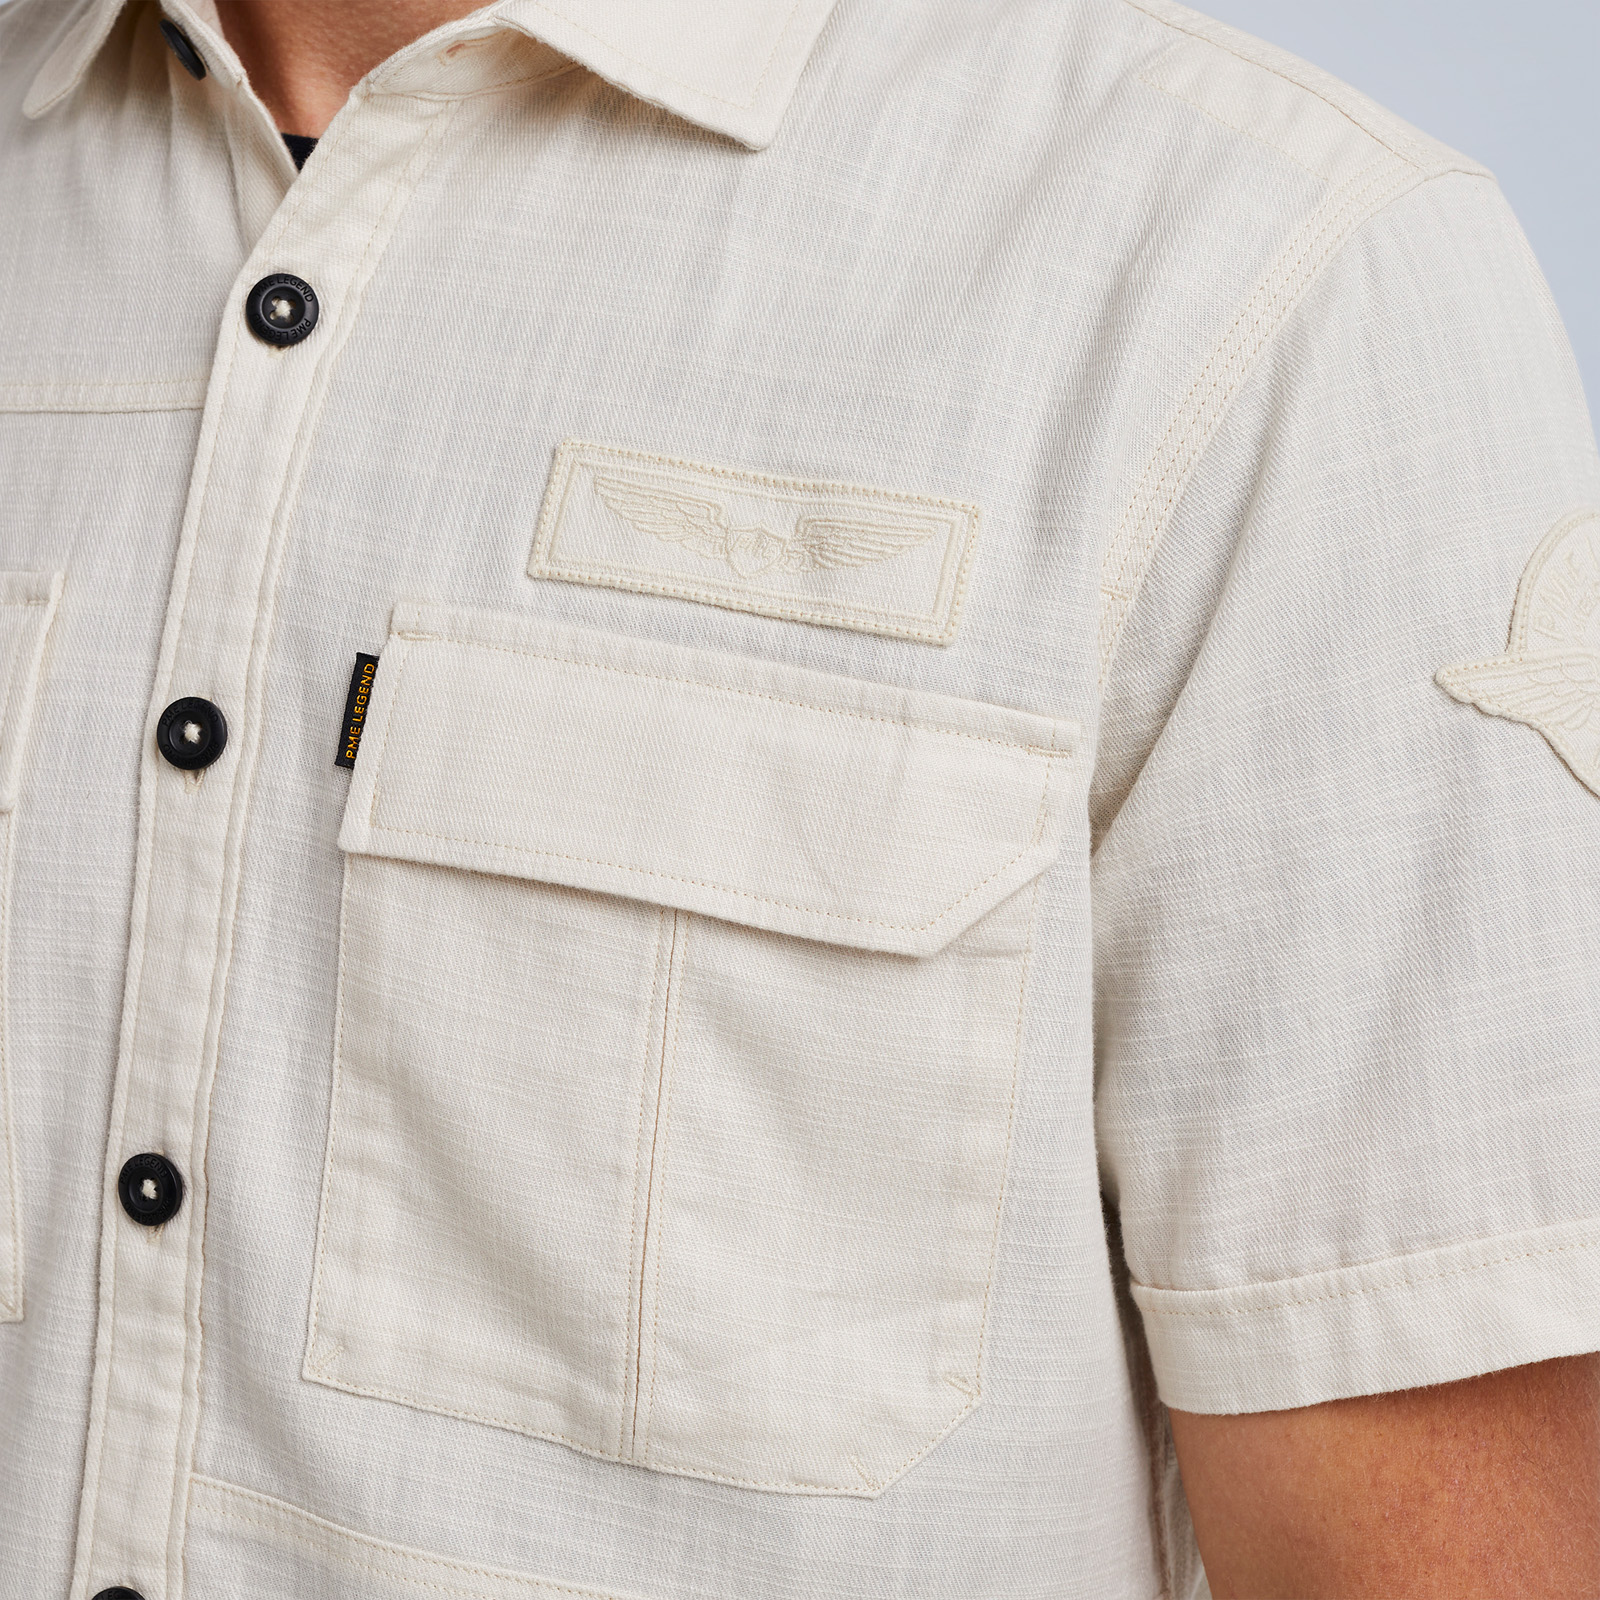 PME LEGEND | Short Sleeve Cotton Shirt | Free shipping and returns